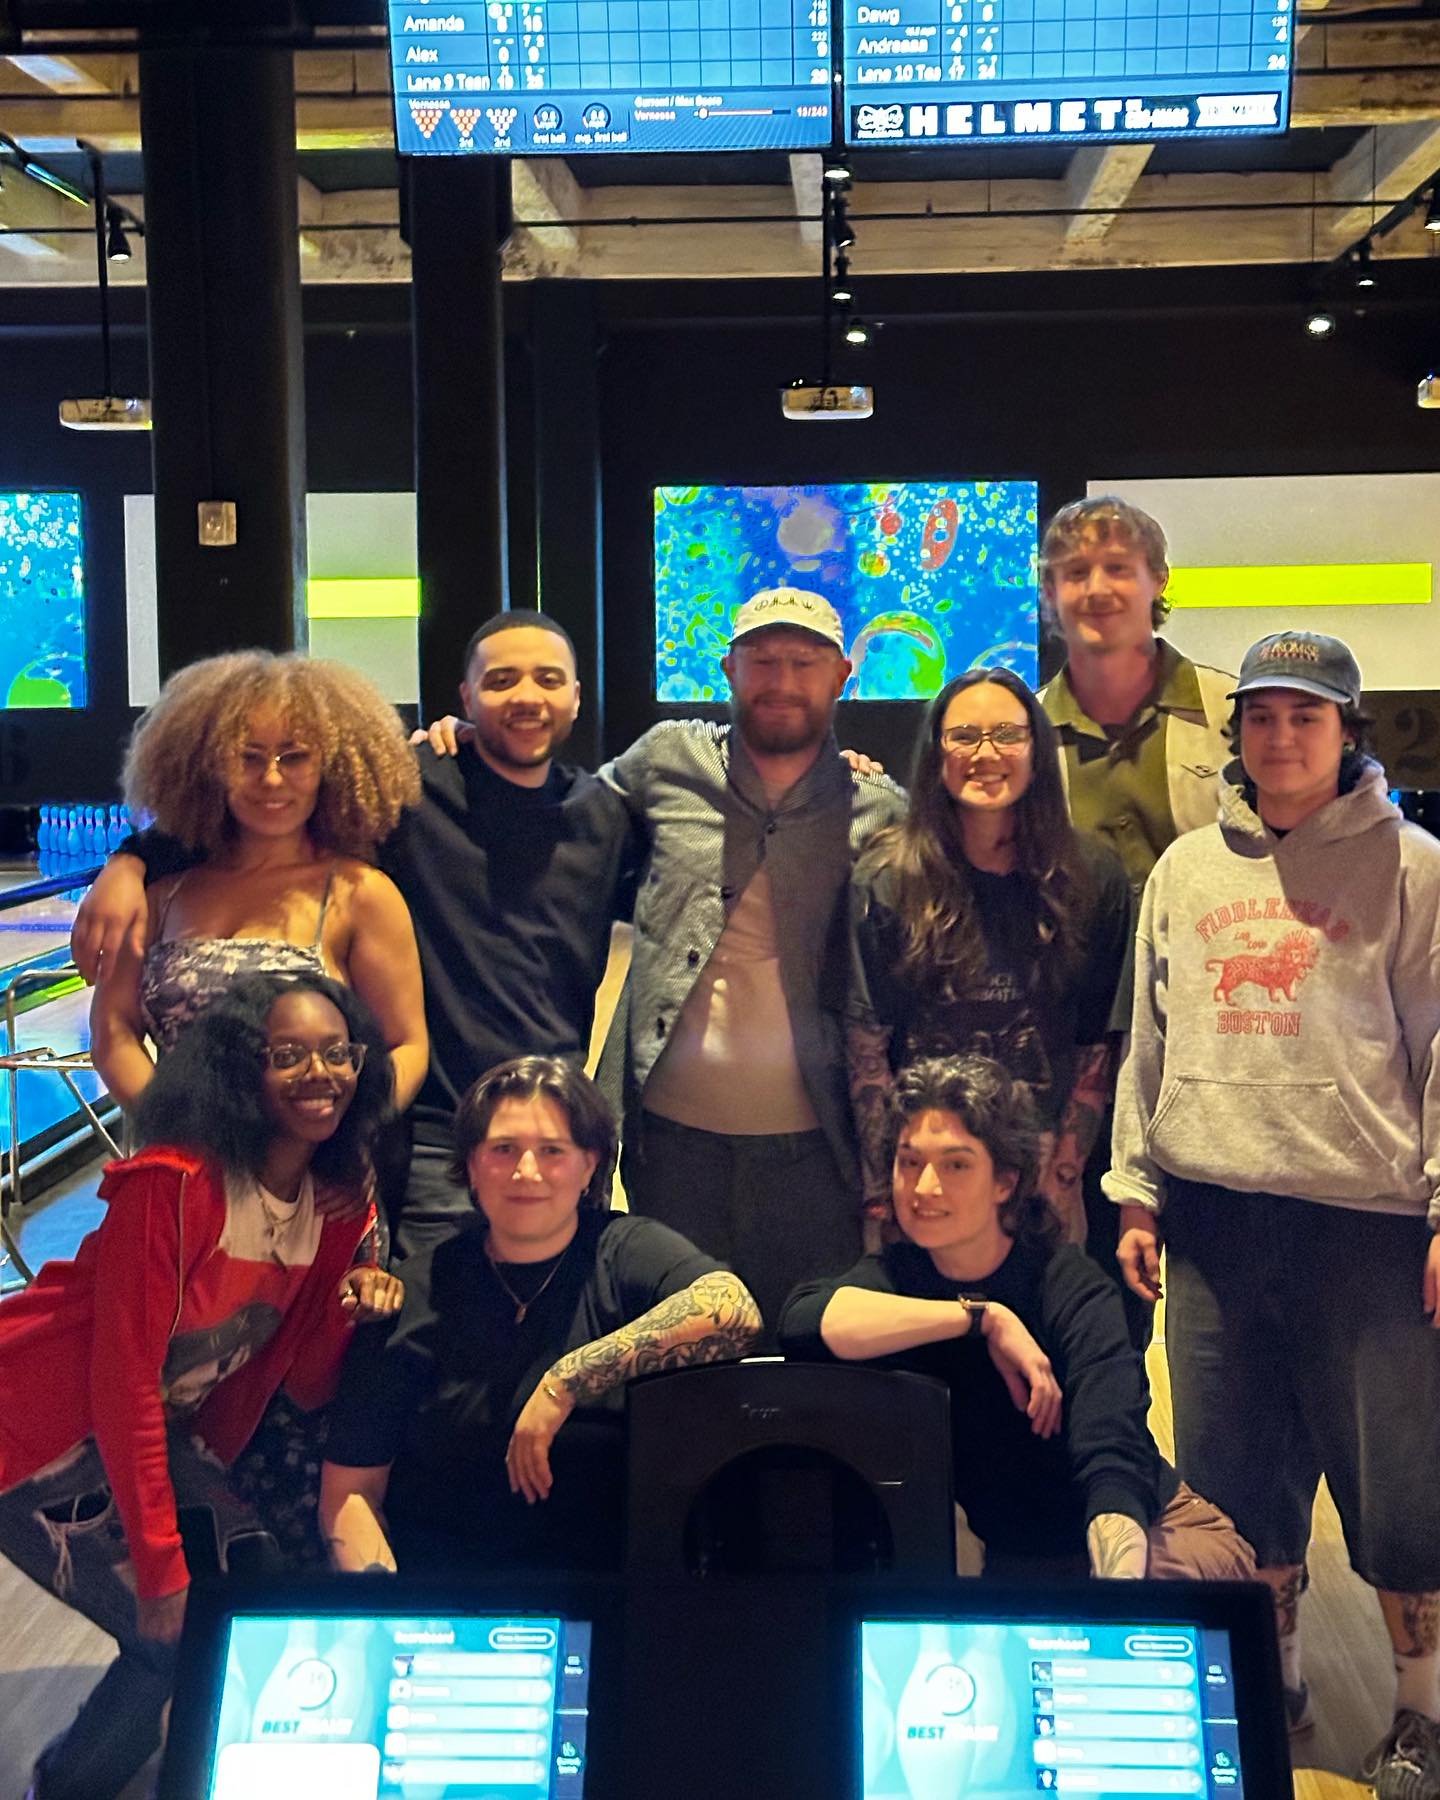 Real recognize Real. 
Last Saturday the barber crews from @bornfreebarber and @winsomeforgood came together for some &ldquo;ultra serious&rdquo; bowling action 🤓
Bottom line- it was a great time but we should all prob stick to cutting hair #gutterba